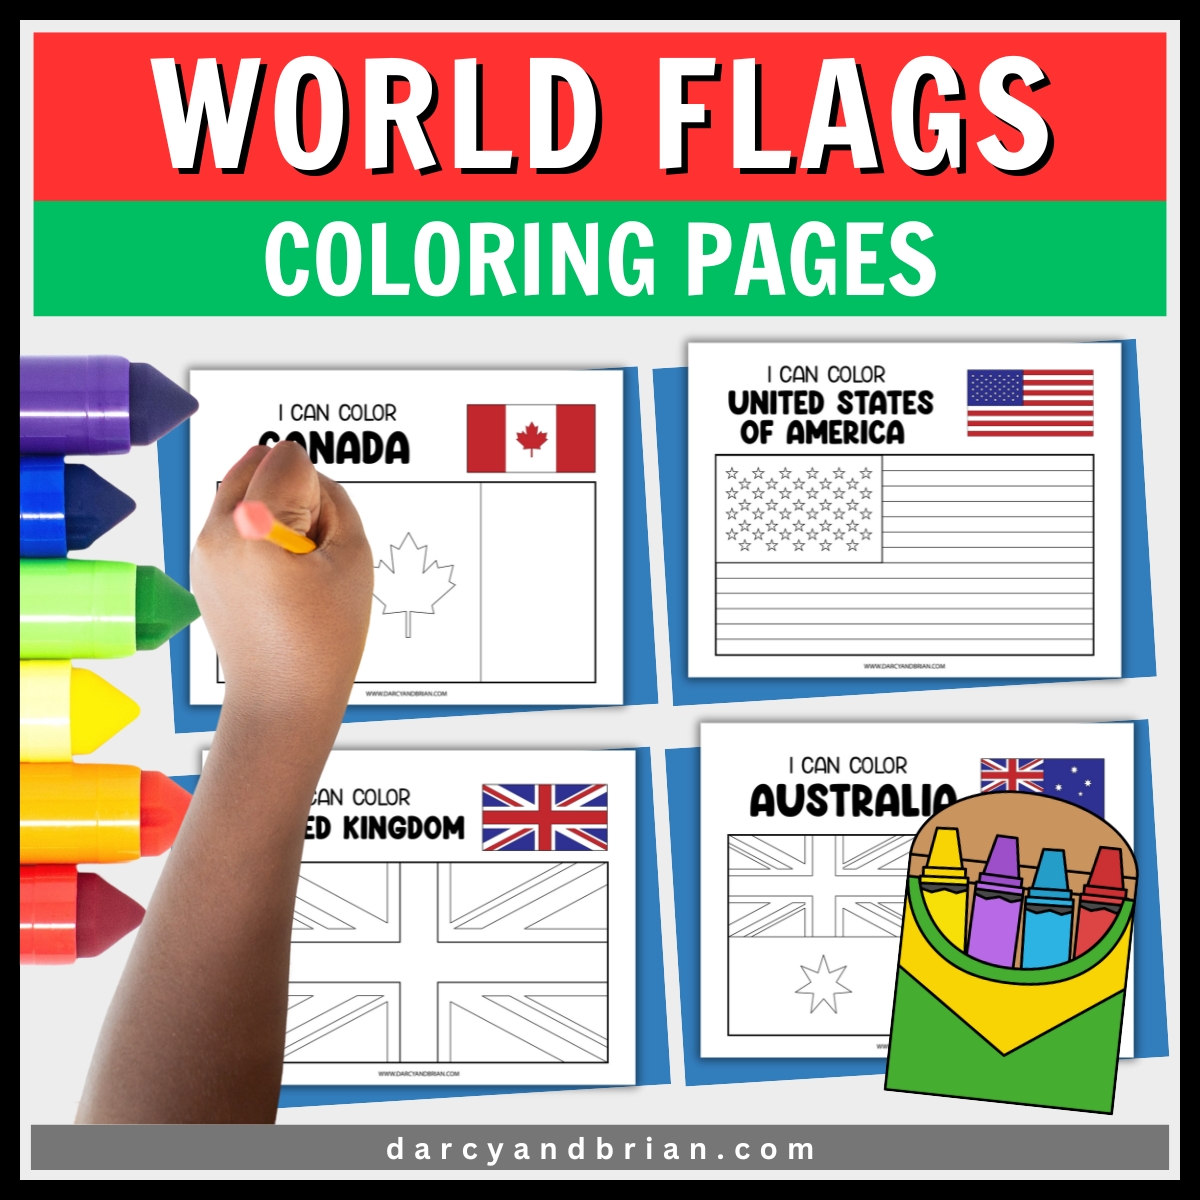 World Flags Coloring Pages